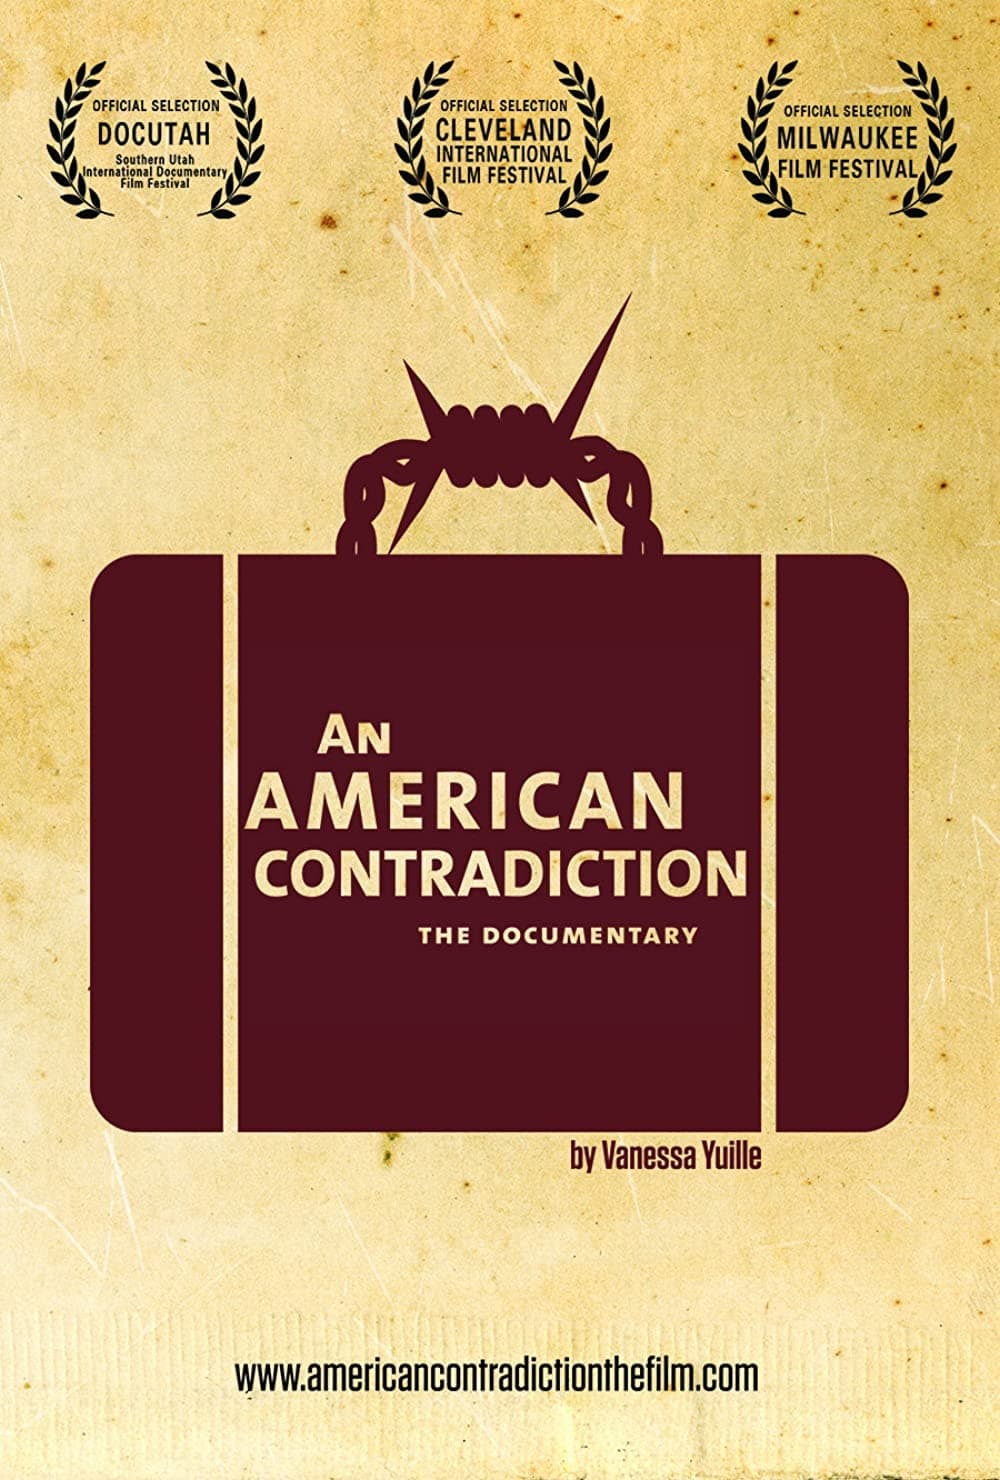 An American Contradiction